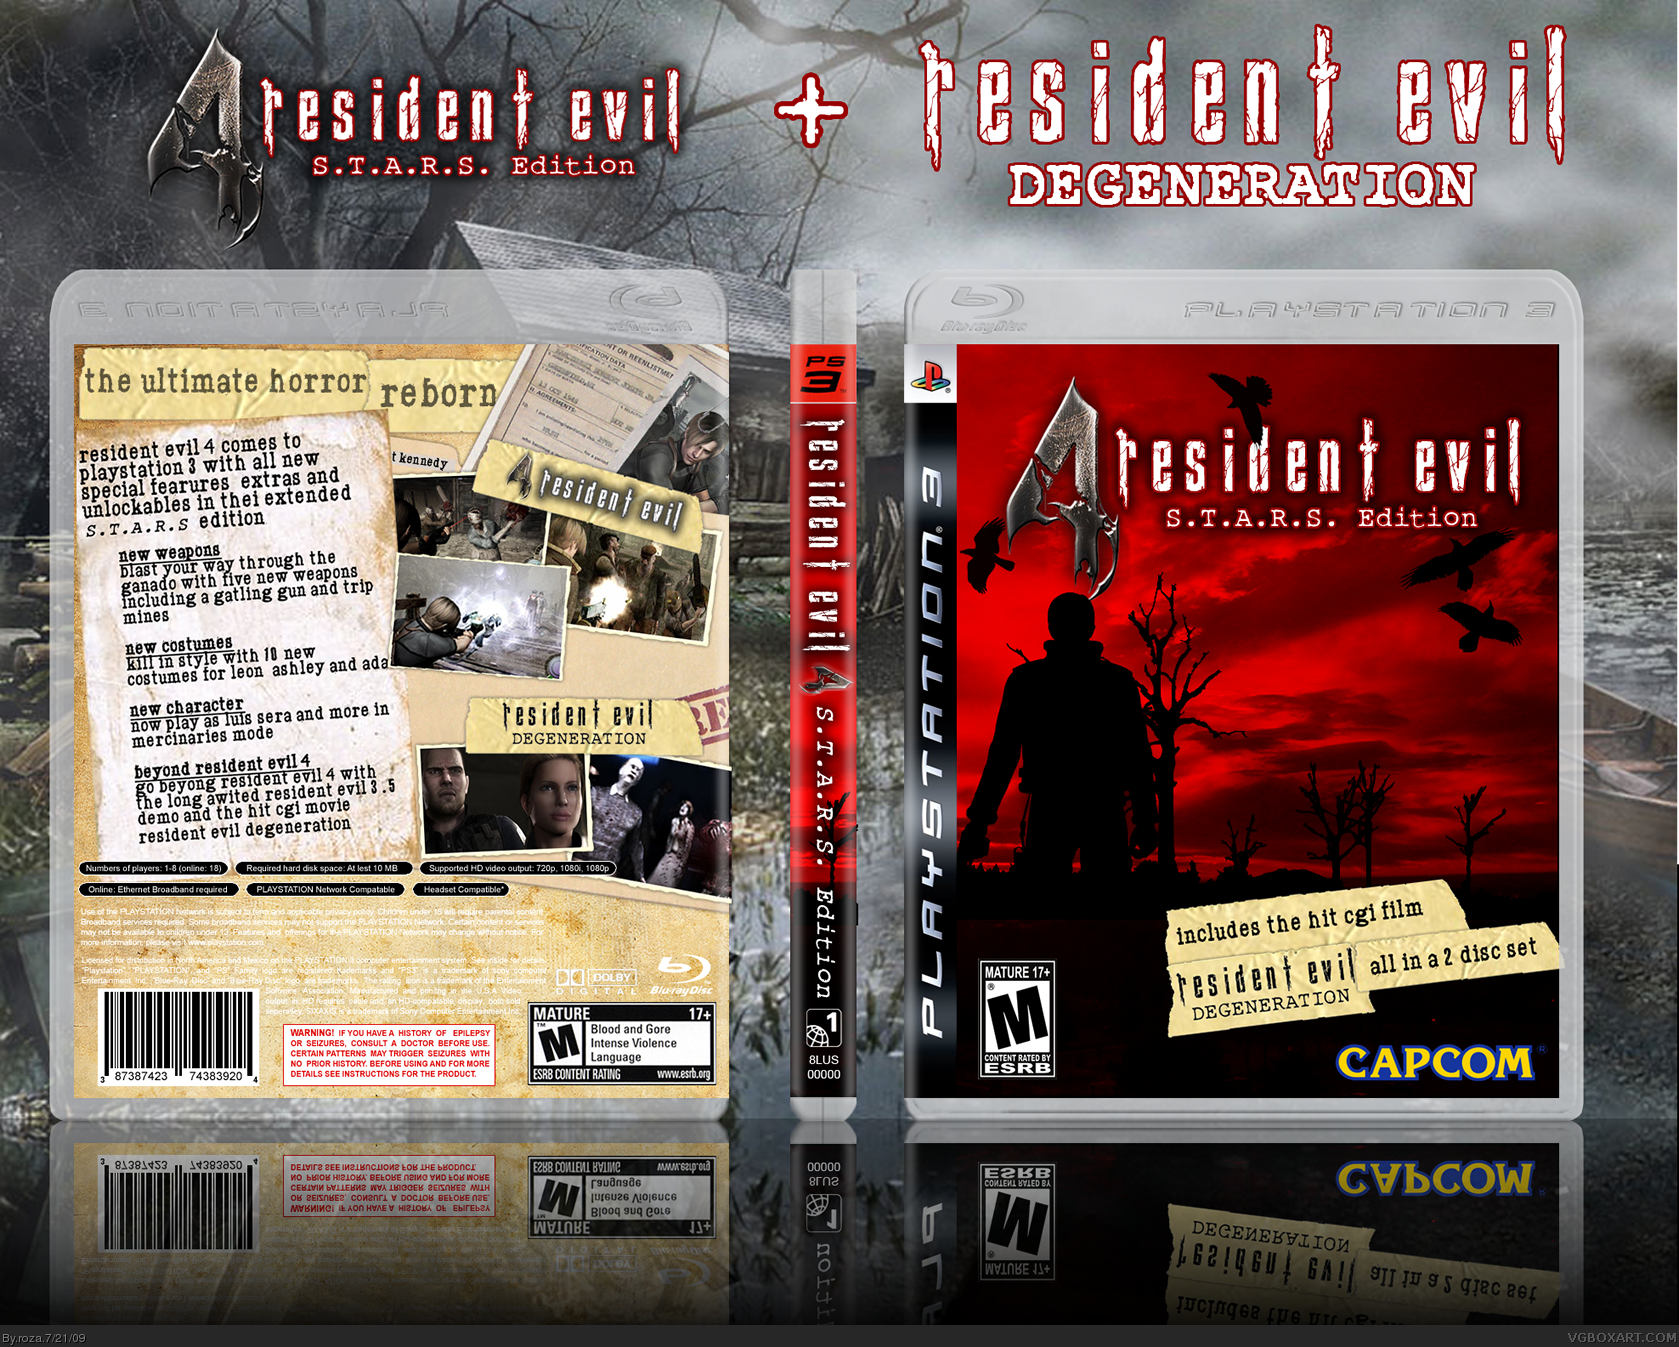 Resident Evil 4: S.T.A.R.S. Edition box cover